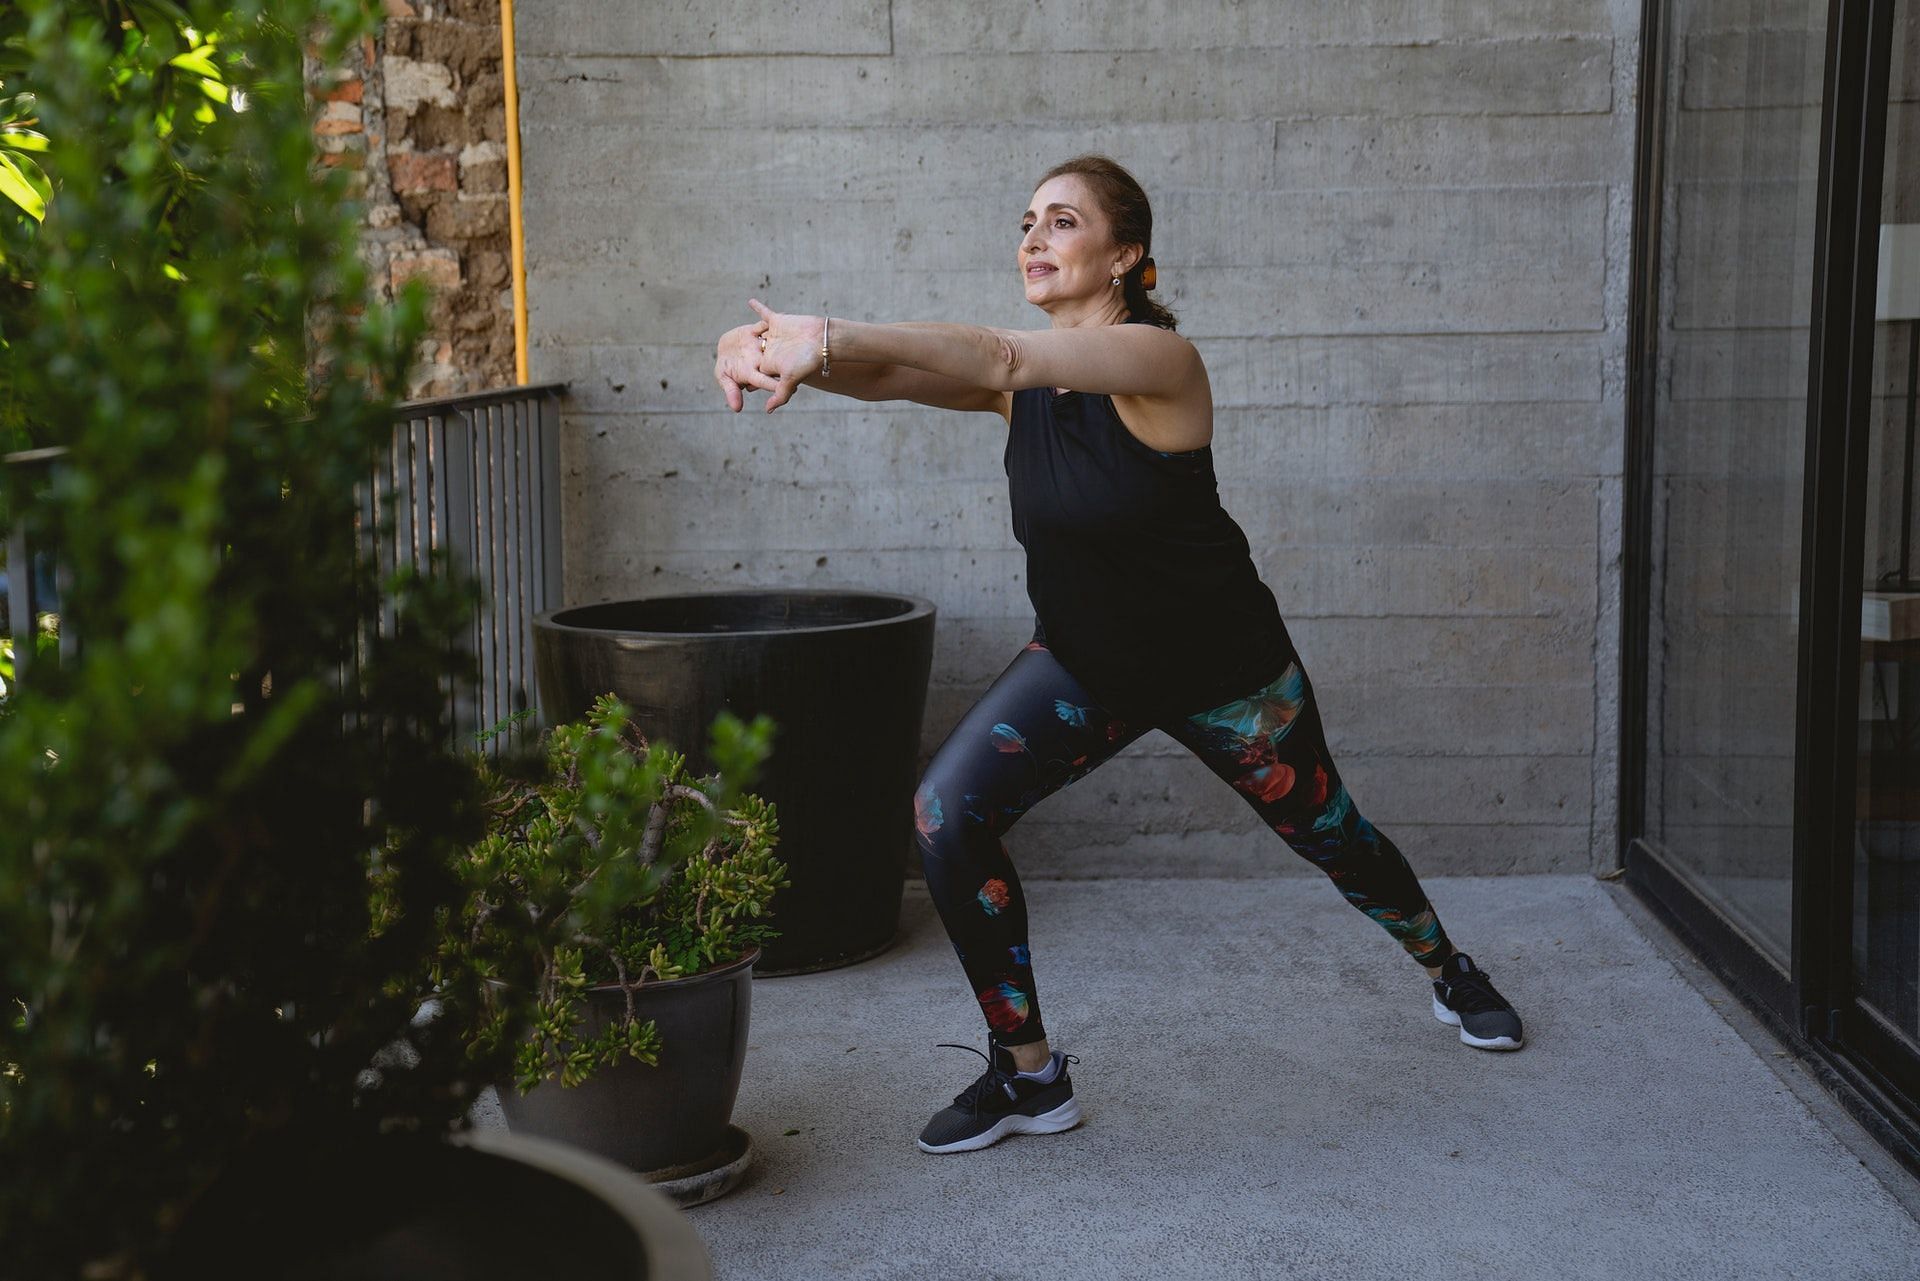 Exercising is important for women of all ages. (Photo by Los Muertos Crew via pexels)